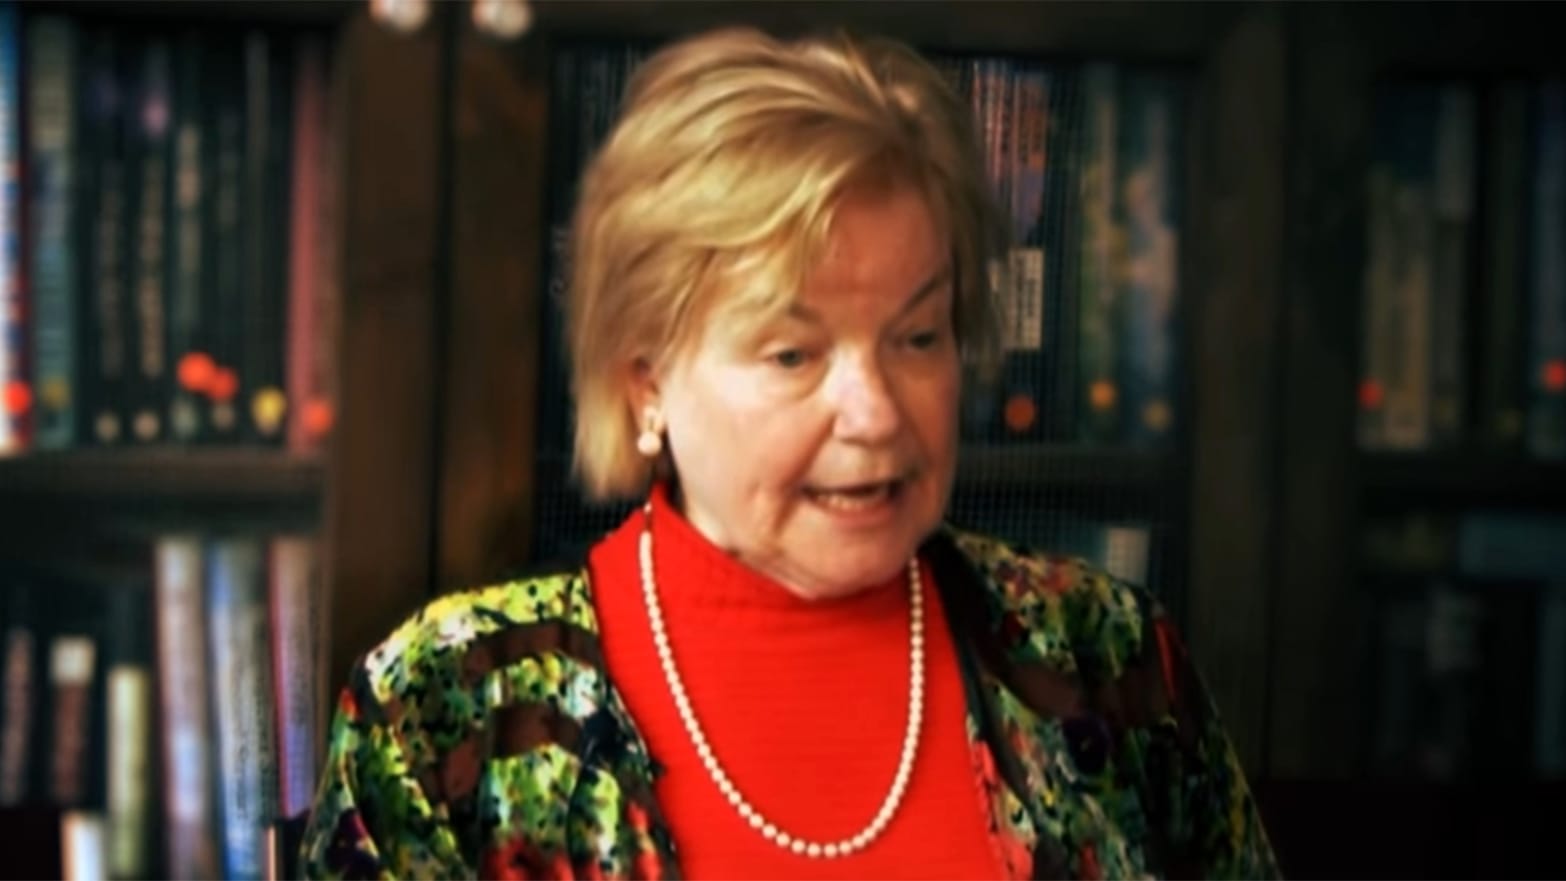 A screen grab from an interview with academic historian Lois Banner.